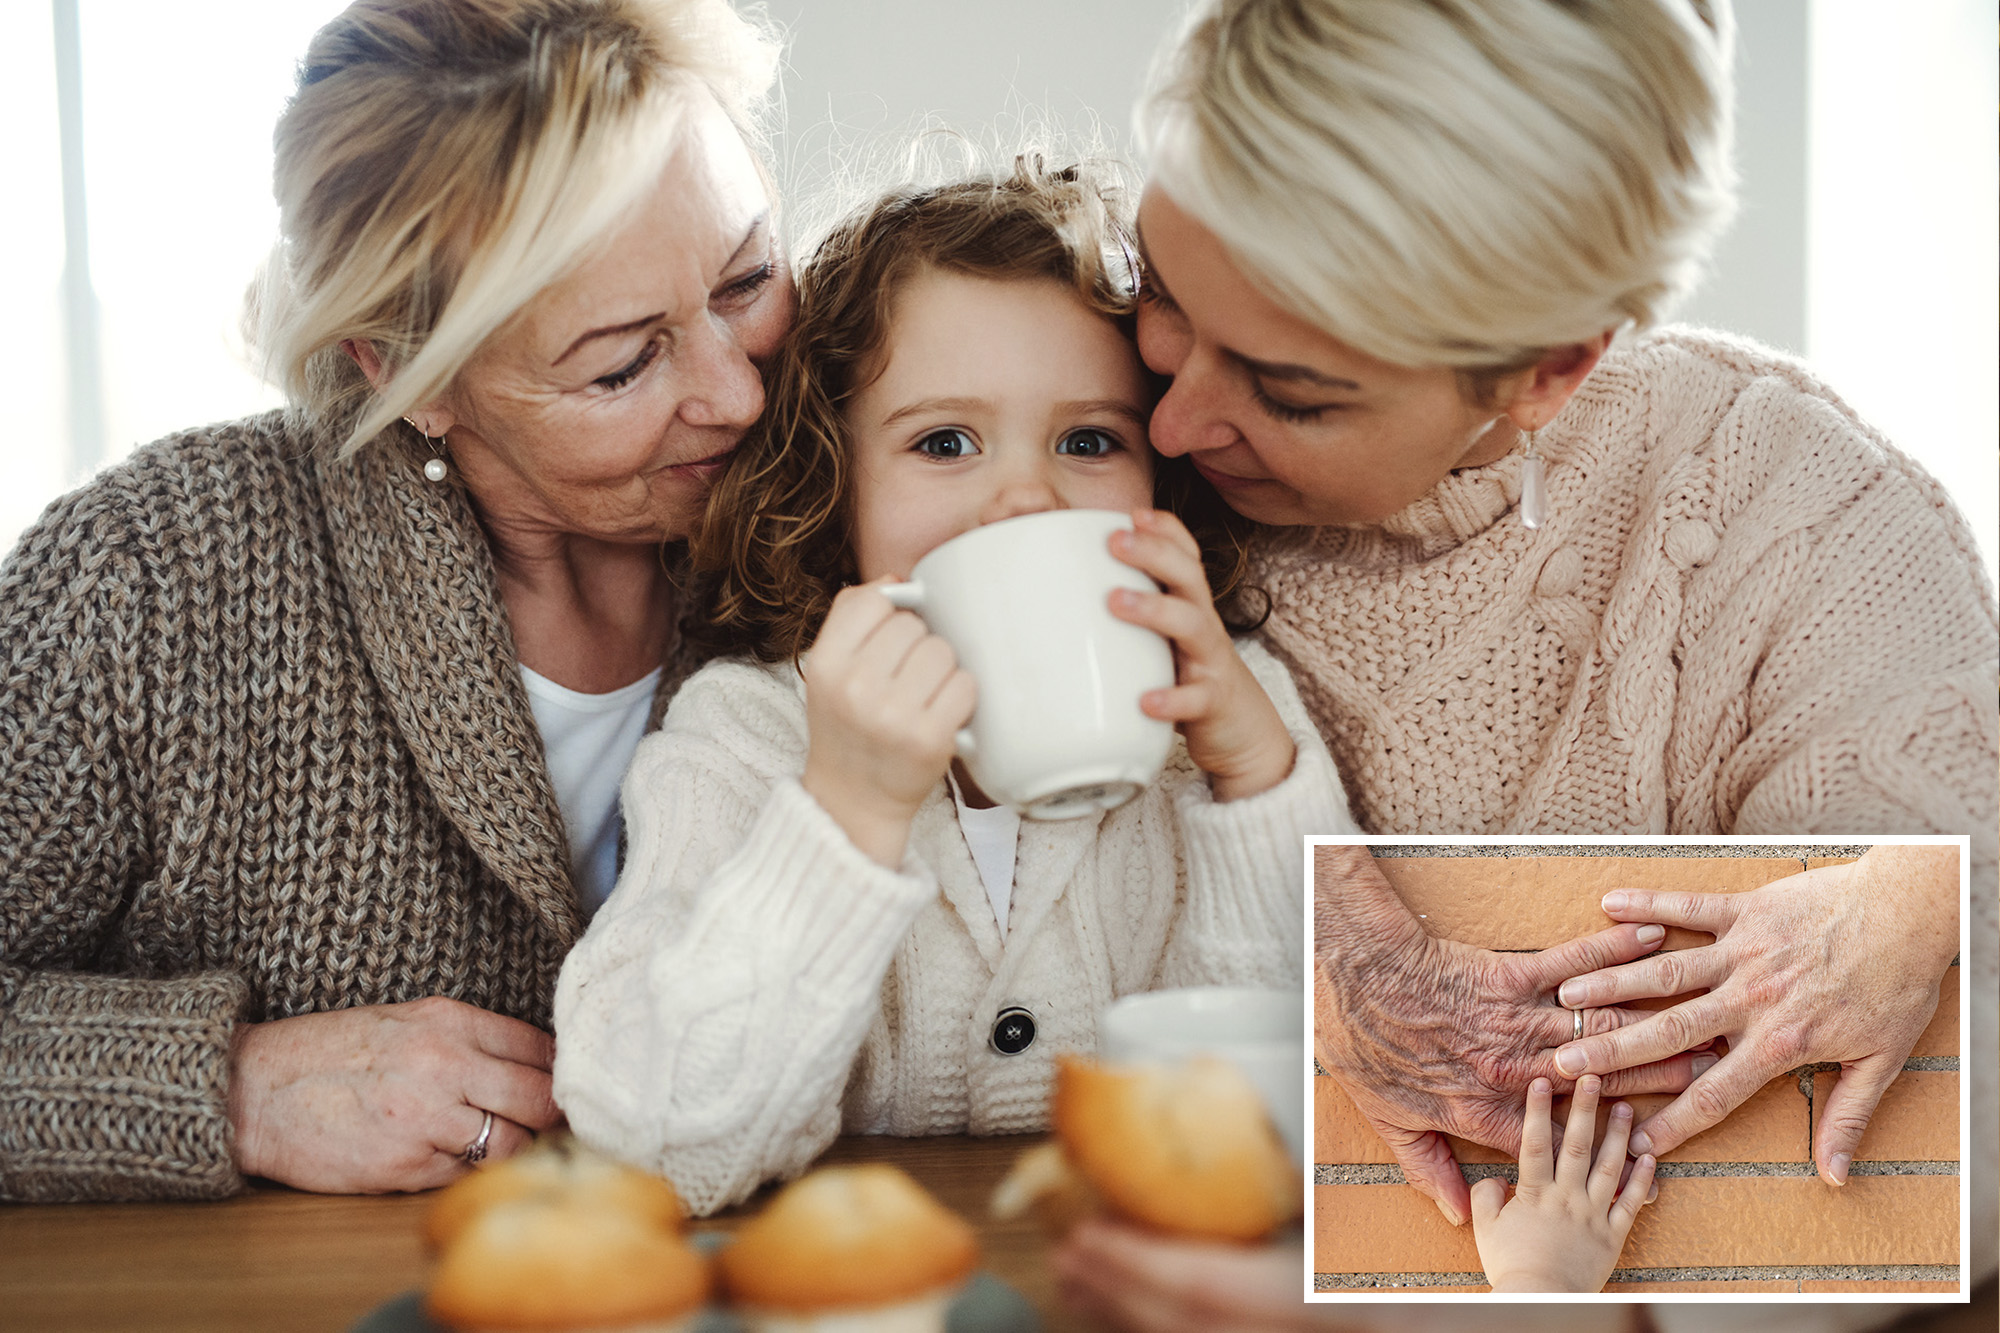 A happy small girl with her mother and grandmother sitting at a table at home, drinking from a mug.